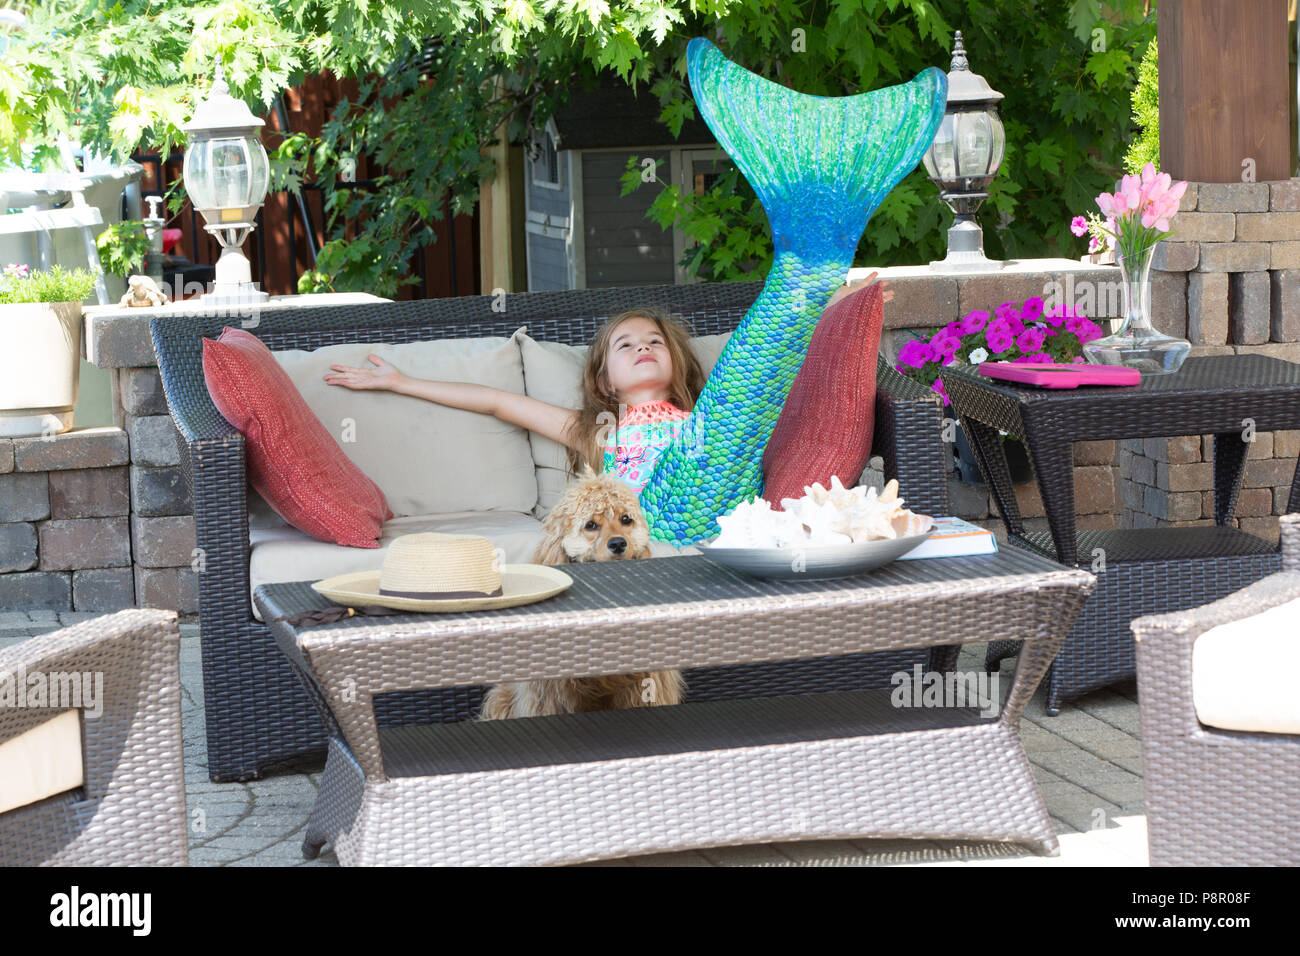 Young girl playing in a colorful mermaid outfit with a blue and green tail relaxing on a couch on the patio with her cocker spaniel puppy Stock Photo